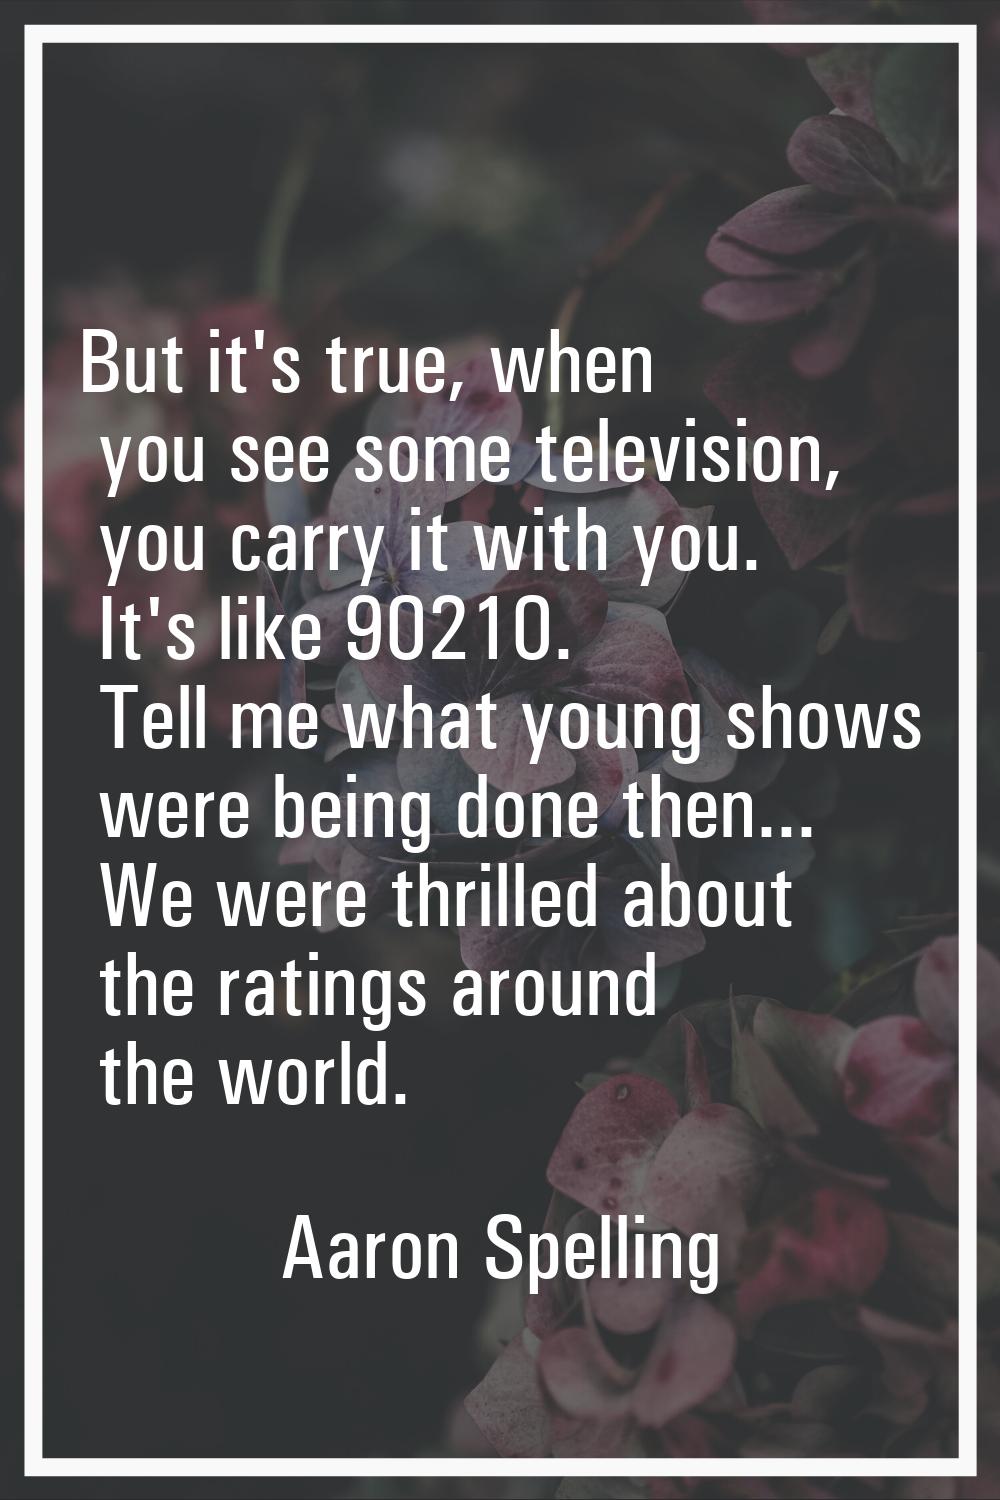 But it's true, when you see some television, you carry it with you. It's like 90210. Tell me what y